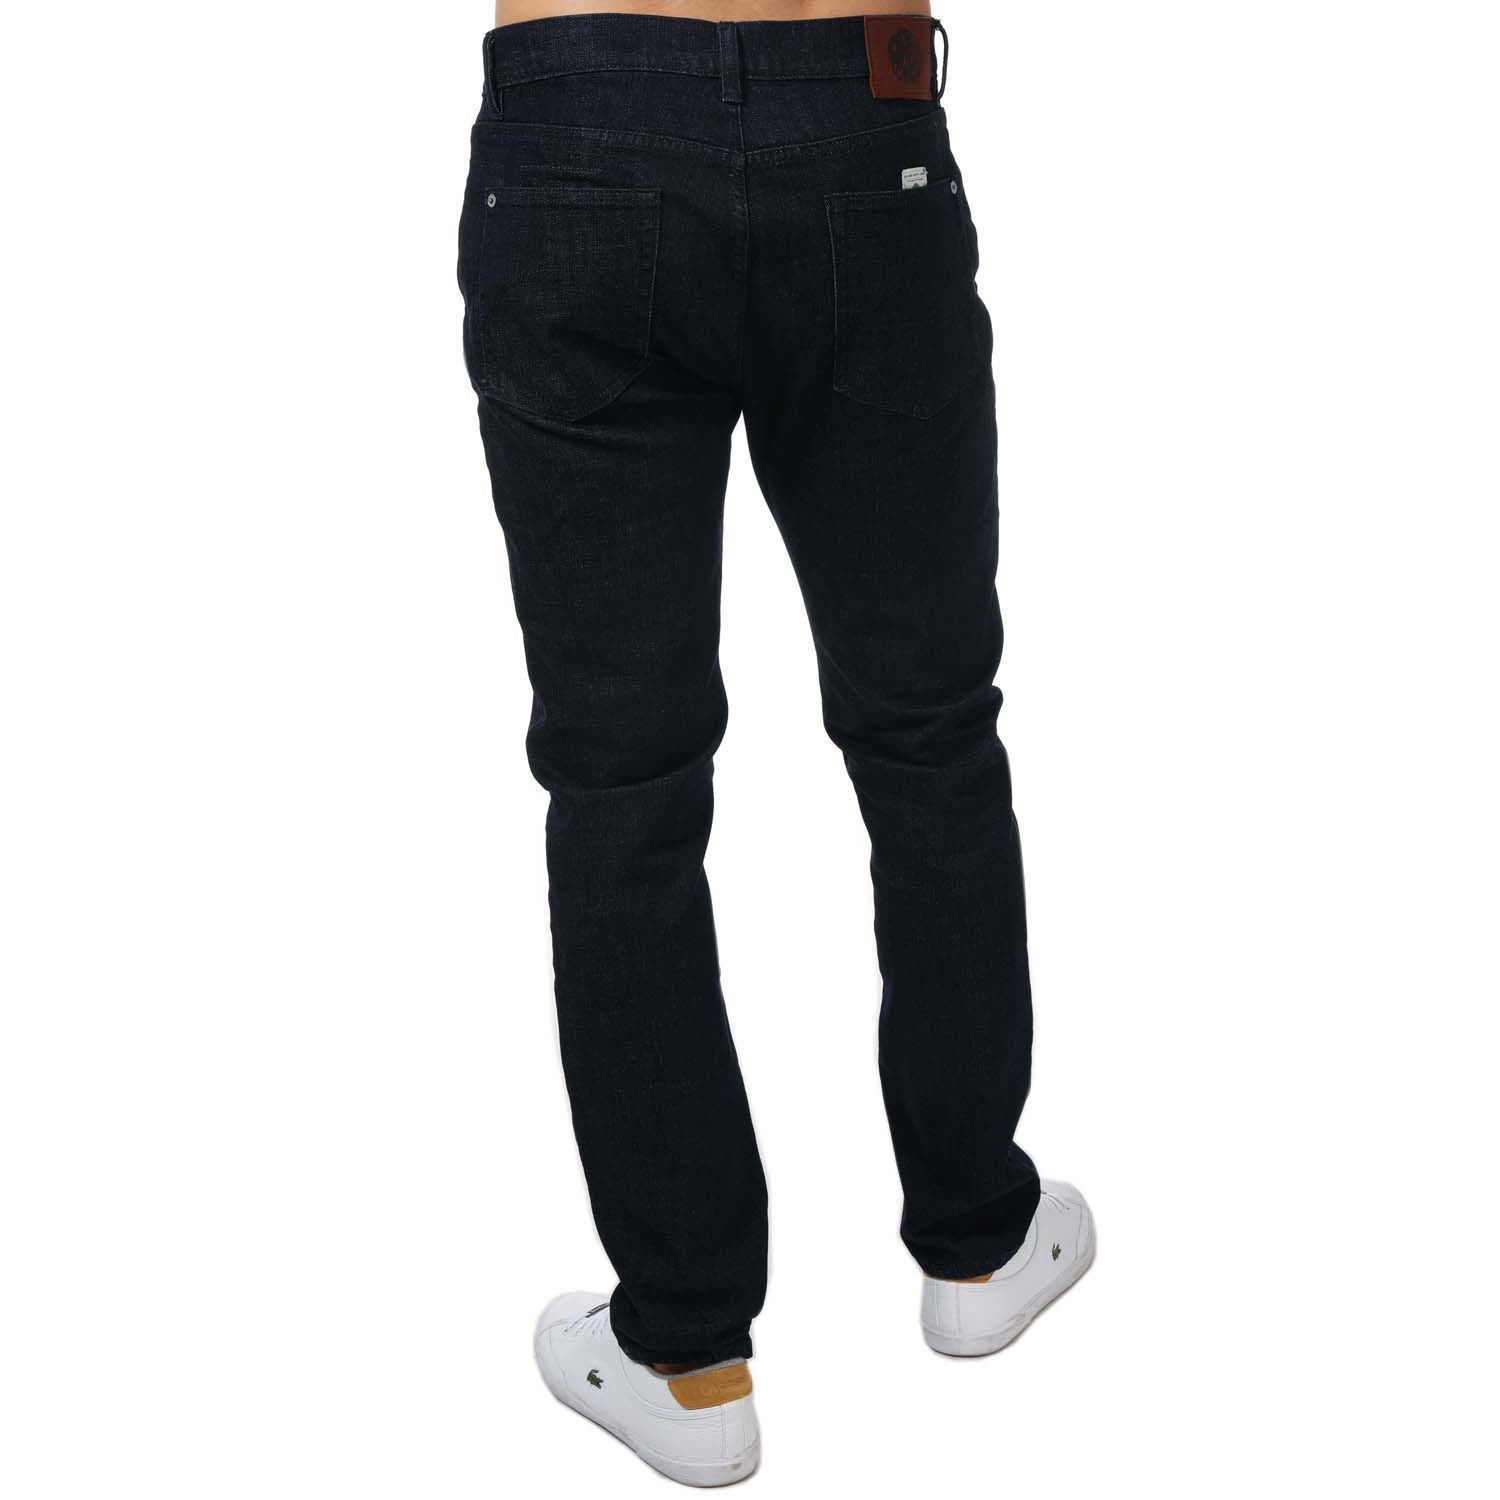 Mens Pretty Green Erwood Slim Fit Jeans in navy.- 5-pocket construction. - Concealed button fly closure.- Twin needle stitching.- Woven logo label at front waist band.- Branded arcuate at front coin pocket.- Embossed rivets and metal trims.- Hem chain stitch detail.- Complete with a branded leather patch.- Slim fit.- 99% Cotton  1% Polyurethane.- Ref: G21Q3MULEG598N